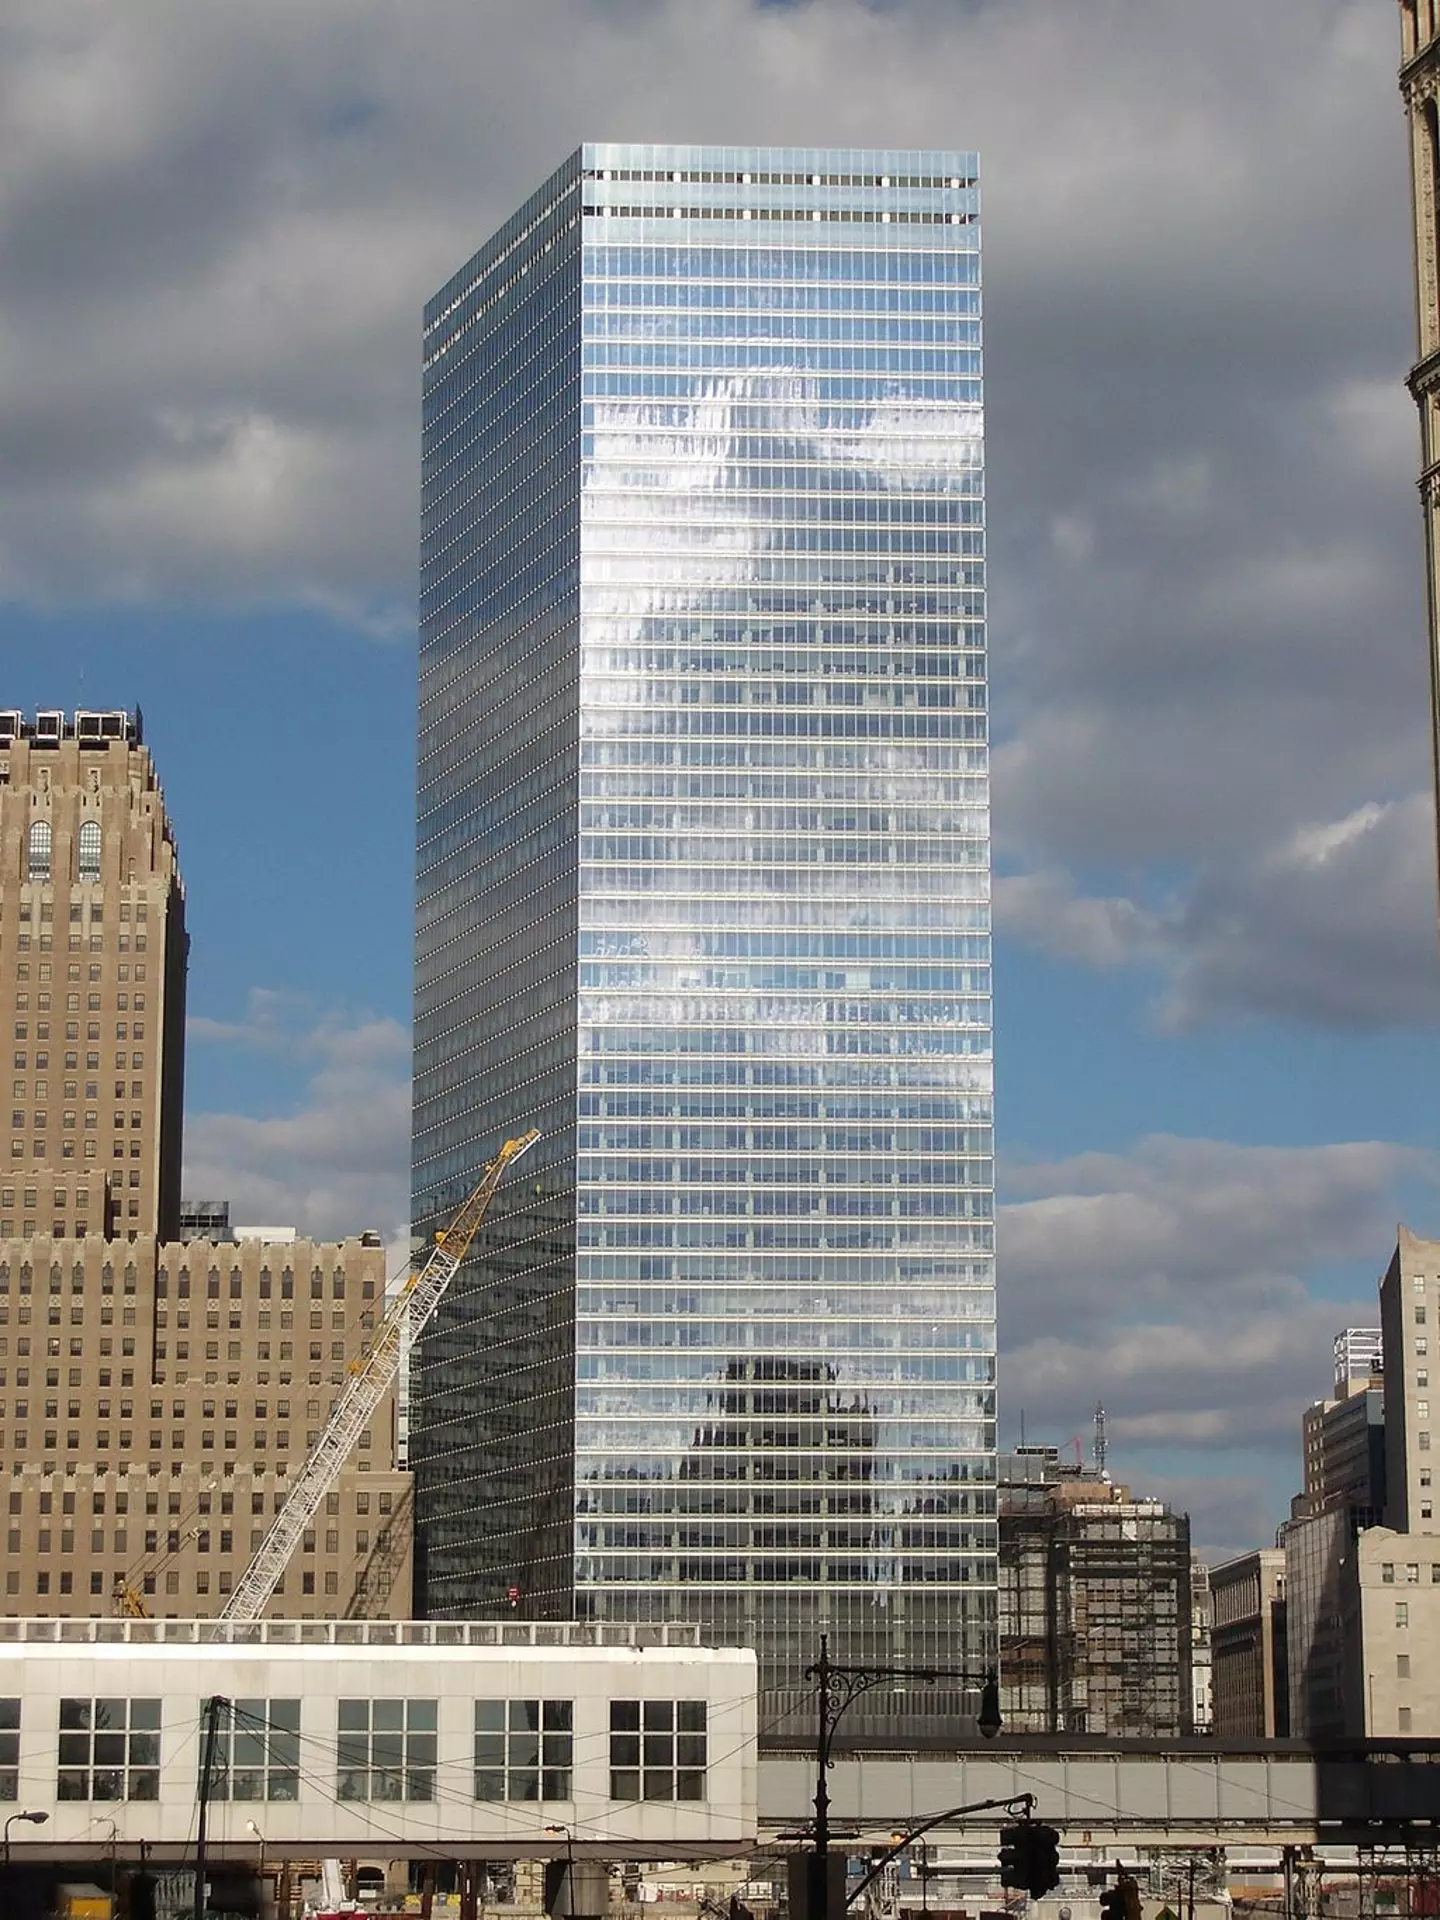 The new Tower Seven, which was rebuilt in 2008.